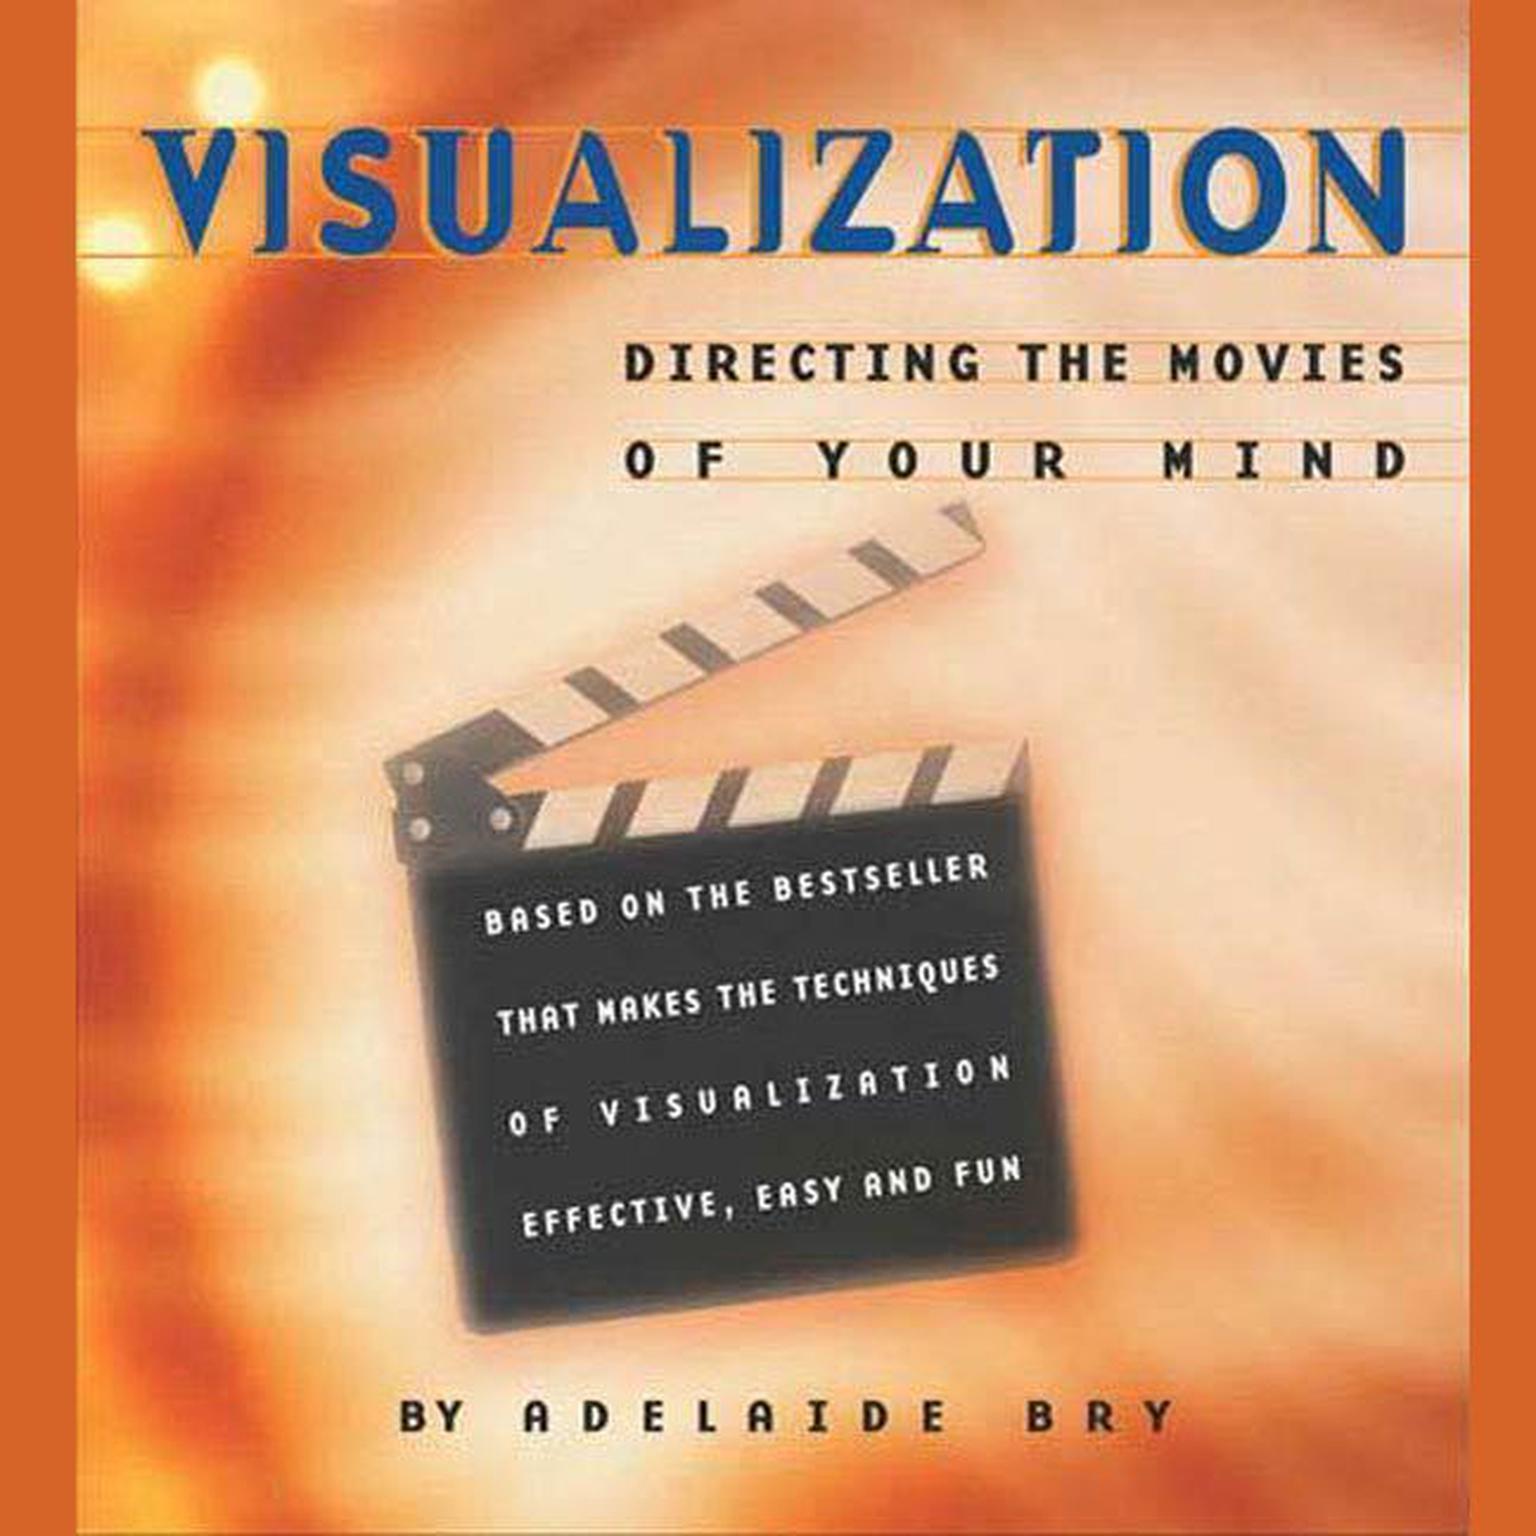 Visualization: Directing the Movies of Your Mind (Abridged) Audiobook, by Adelaide Bry